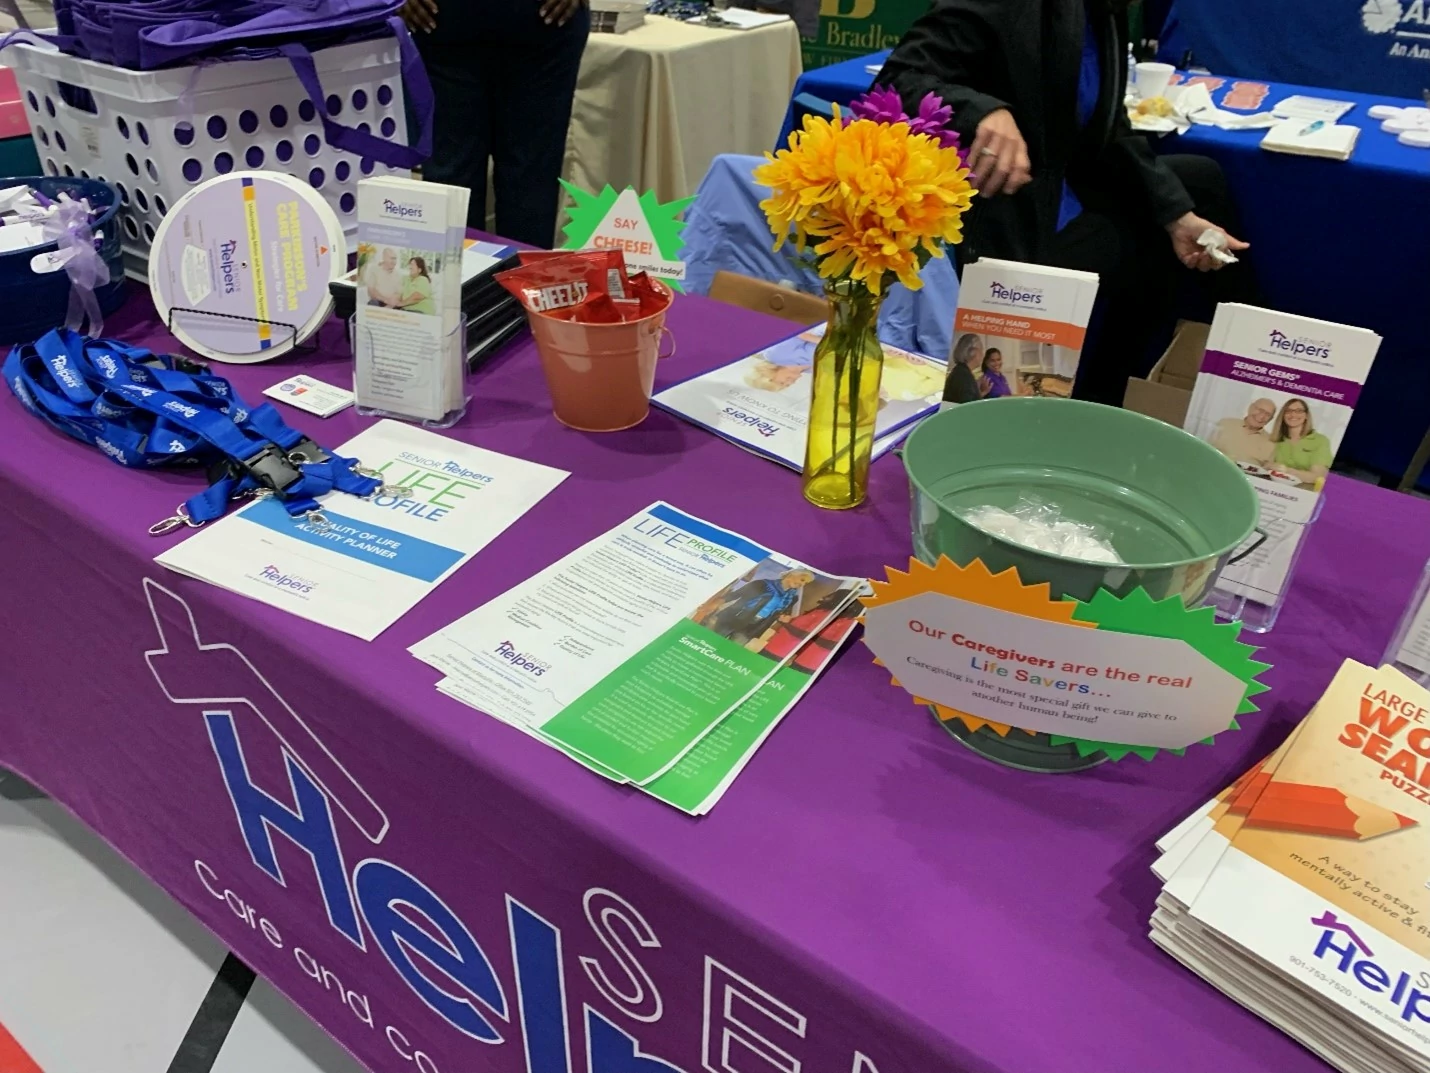 On Tuesday, March 22, many seniors in the Bartlett community braved the pouring rain to attend the Best Times Senior Expo. There were many informative vendors for the seniors to speak with and opportunities to win amazing prizes. Thank you to all who came out and spoke with Senior Helpers!